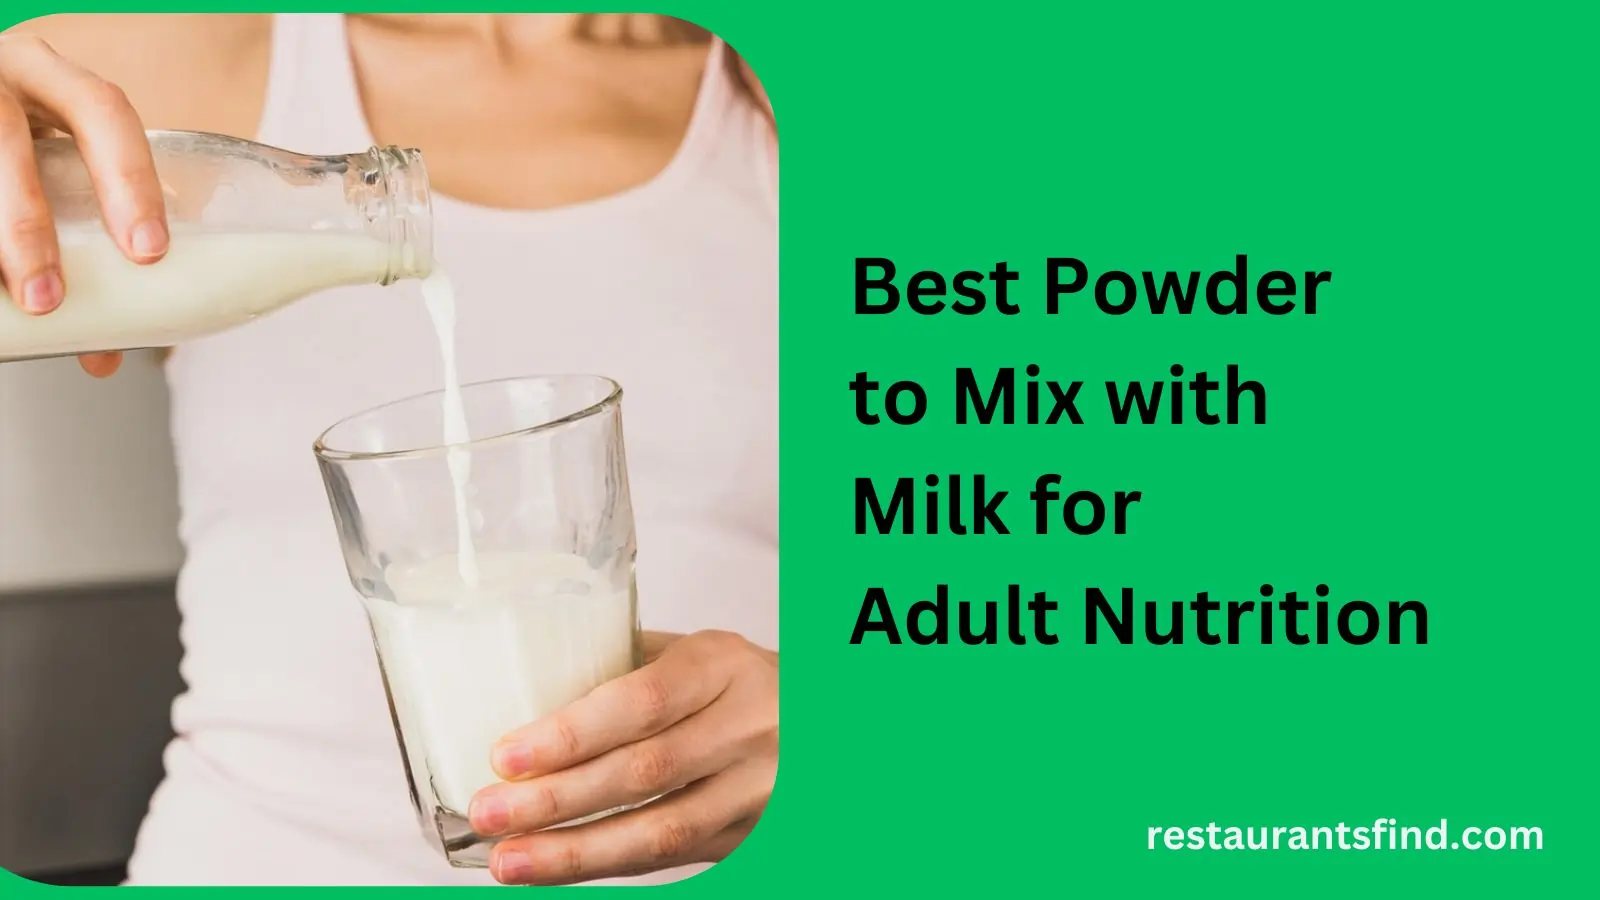 Best Powder to Mix with Milk for Adult